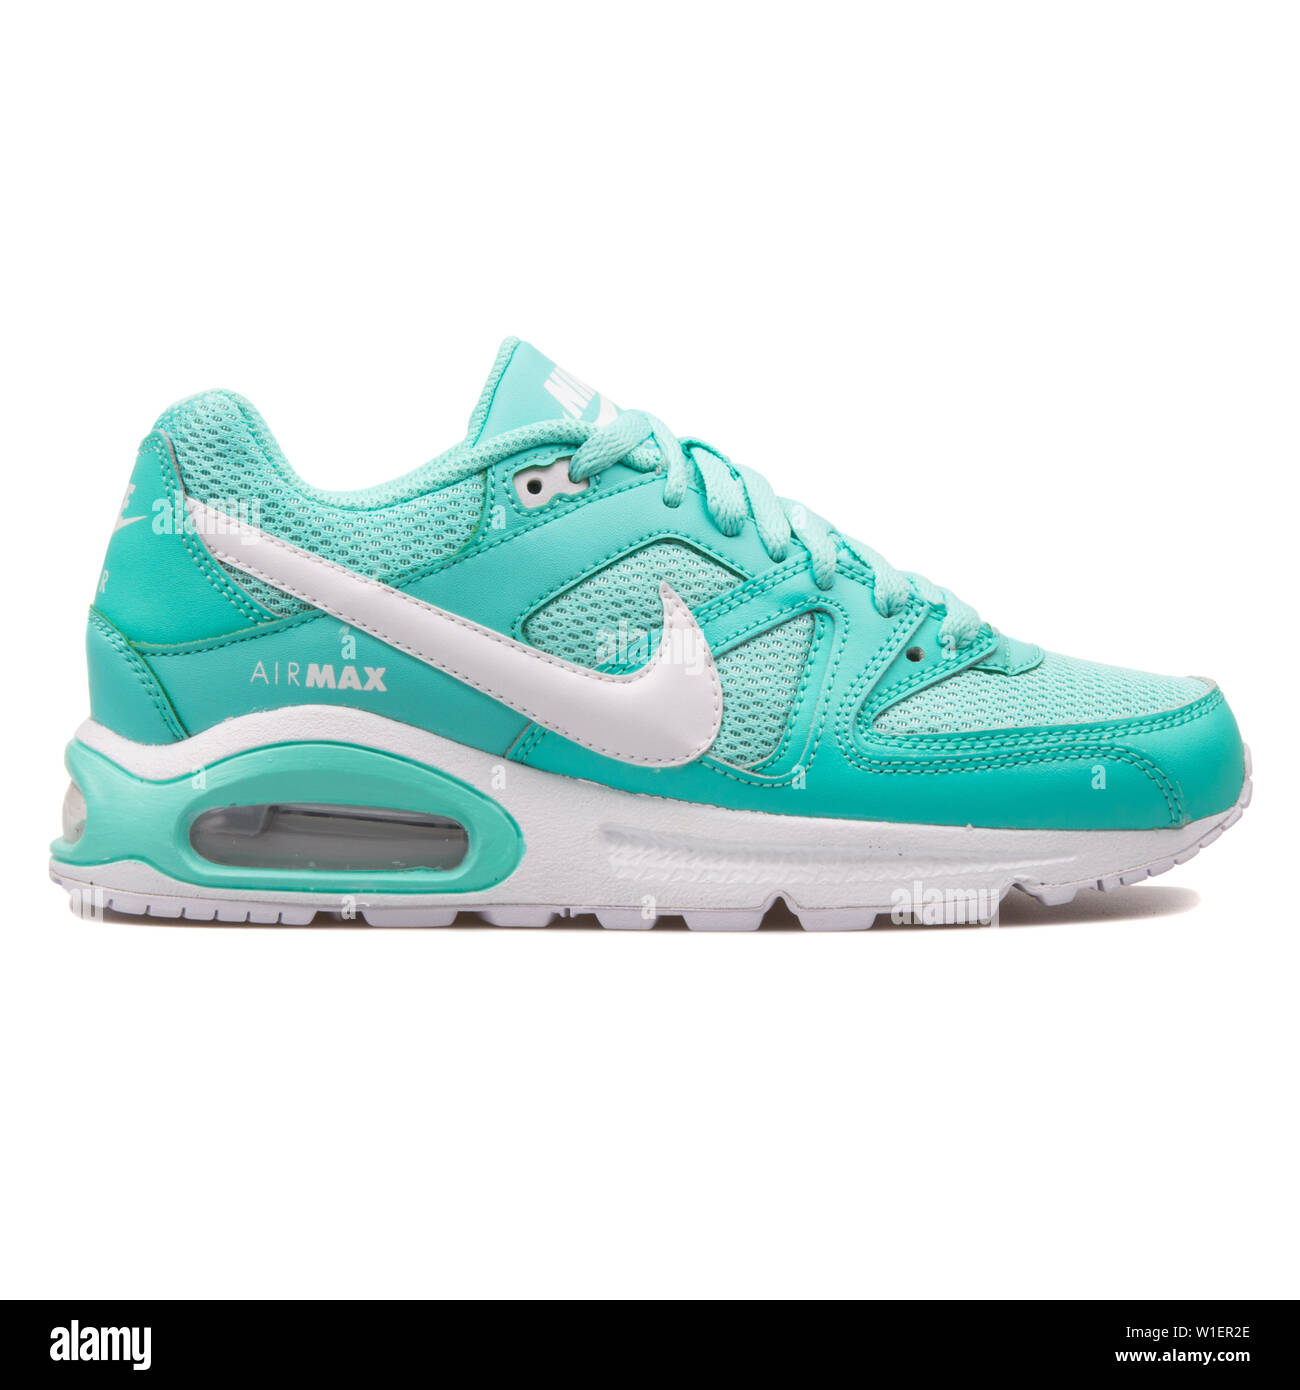 overal Shipley Dinkarville VIENNA, AUSTRIA - AUGUST 10, 2017: Nike Air Max Command turquoise and white  sneaker on white background Stock Photo - Alamy